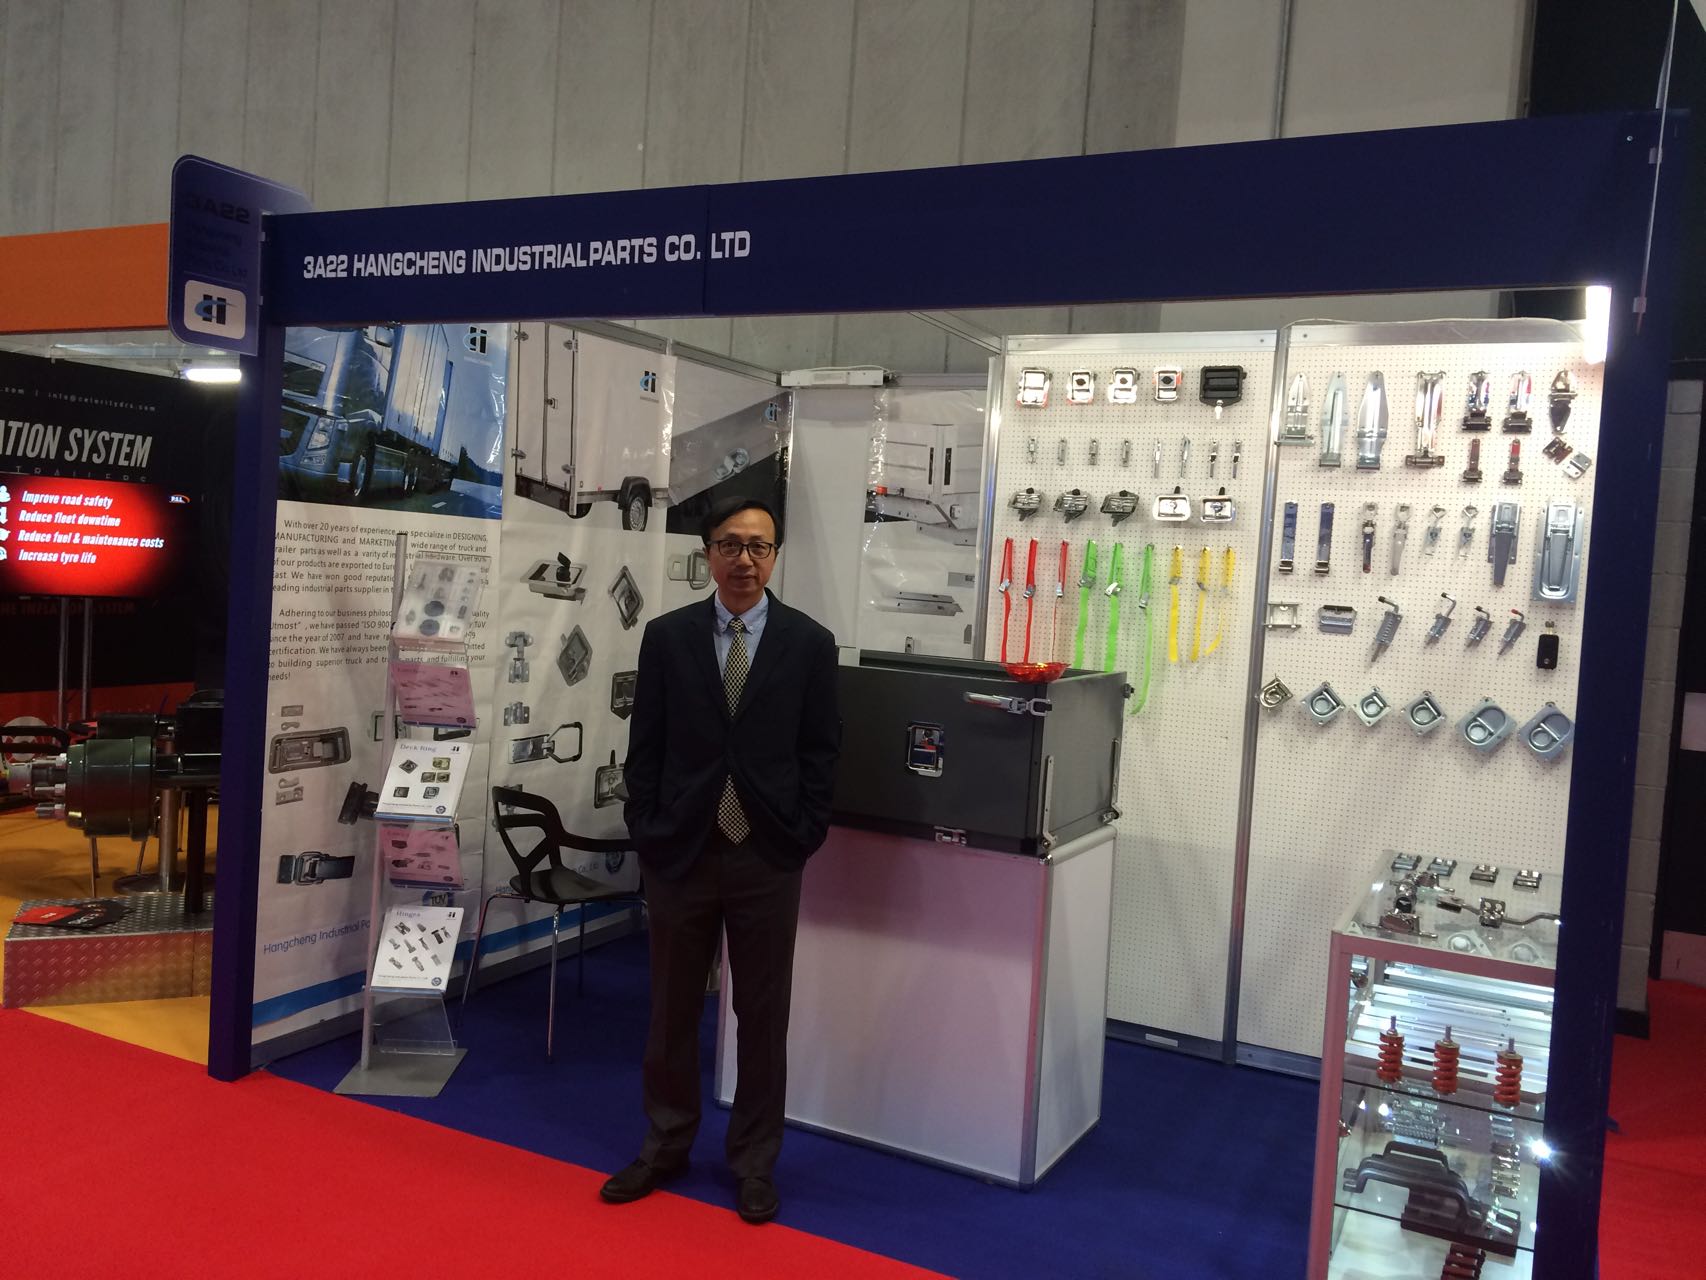 Hangcheng exhibited at UK CV show successfully.